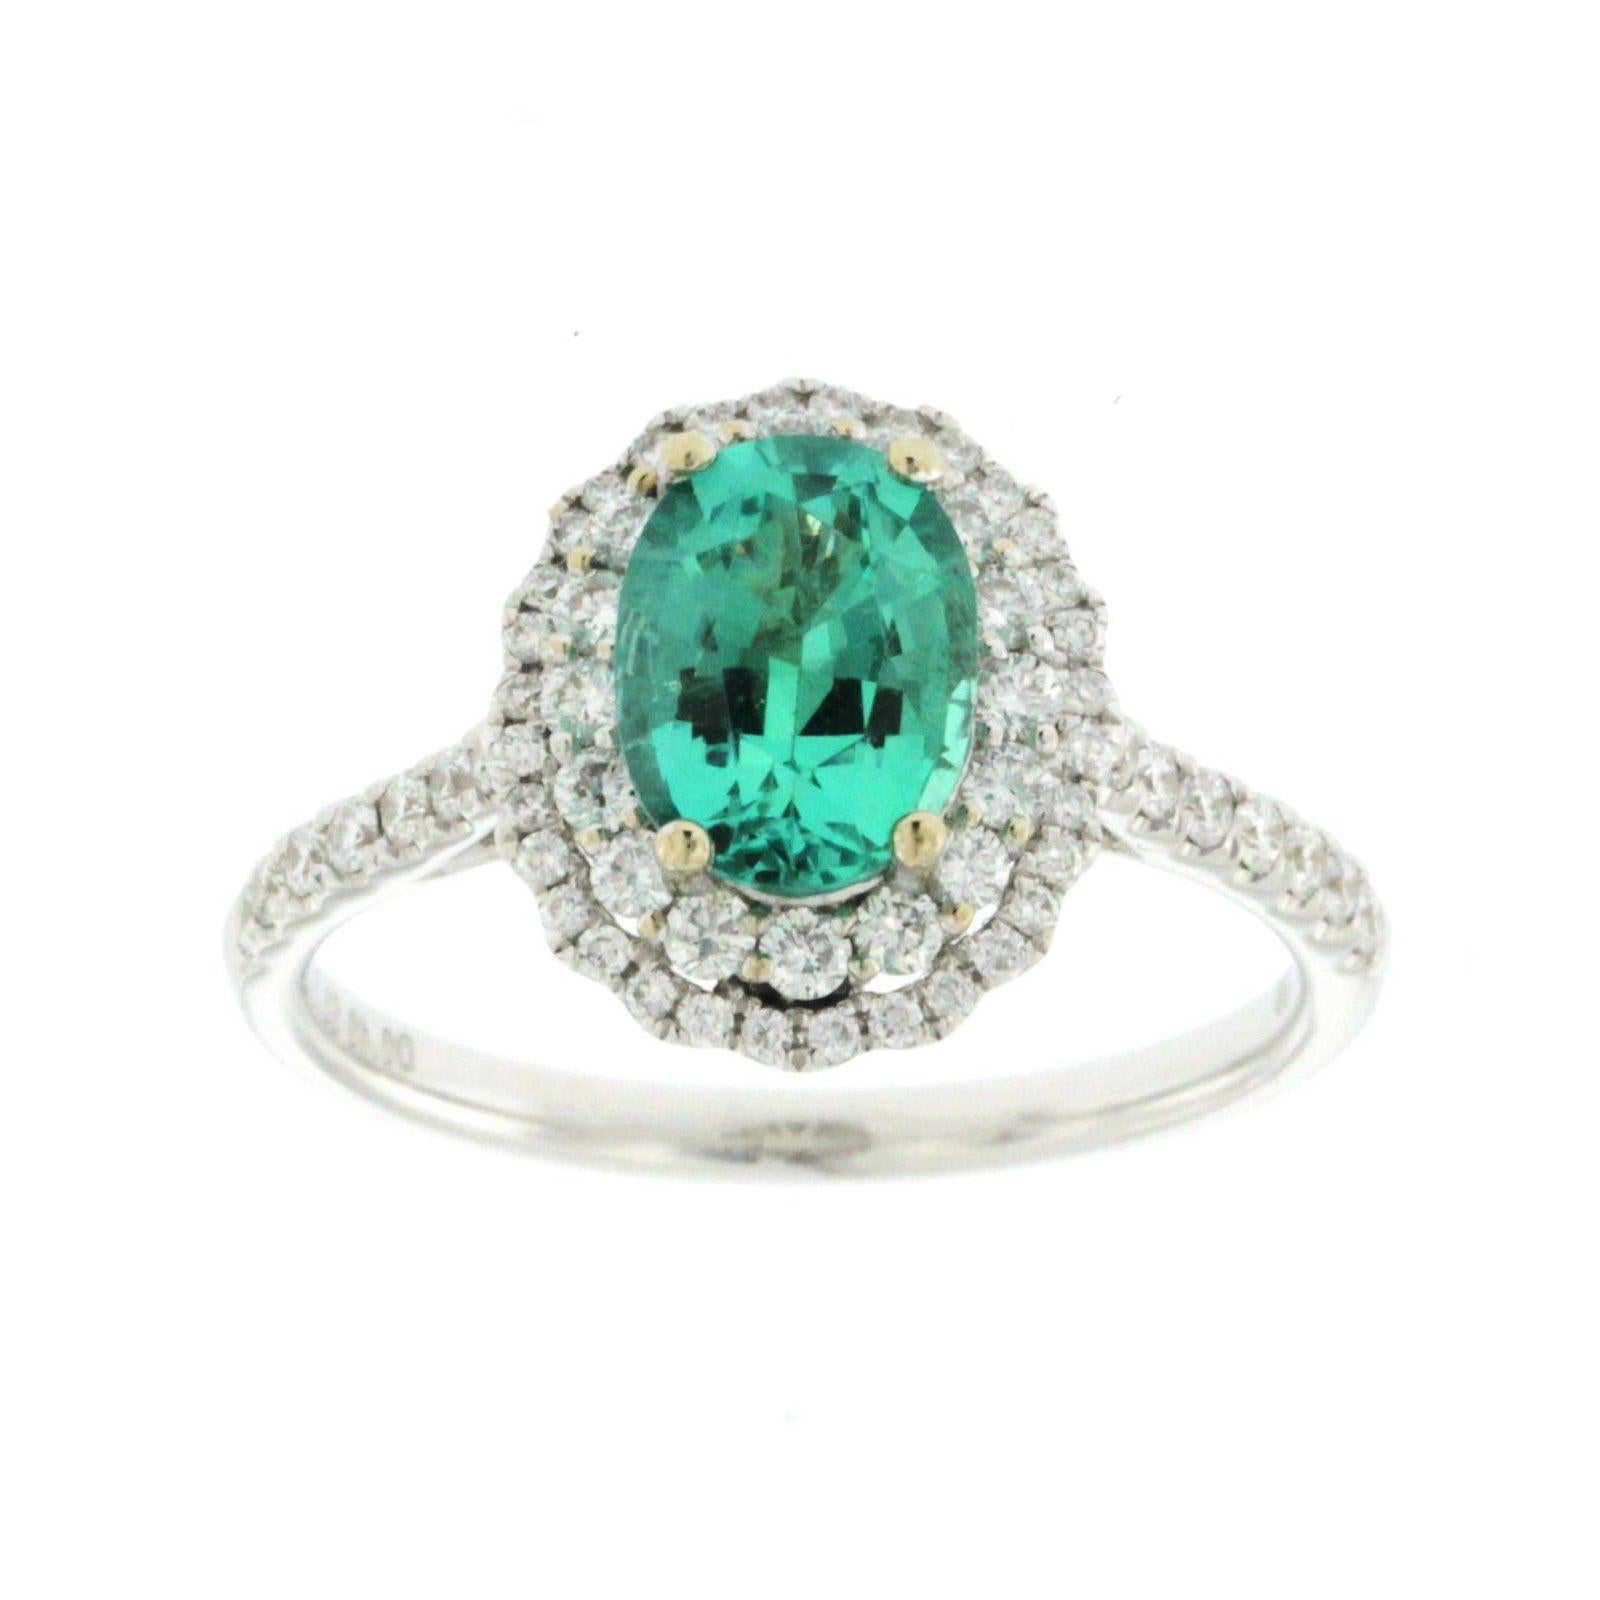 
Top: 13.6 mm
Band Width: 1.5 mm
Metal: 18K White Gold 
Size: 6-8 ( Please message Us for your Size )
Hallmarks: 750
Total Weight: 4.4 Grams
Stone Type: 2.14 CT Natural Emerald & 0.89 G VS2 CT Diamonds
Condition: New
Estimated Retail Price: